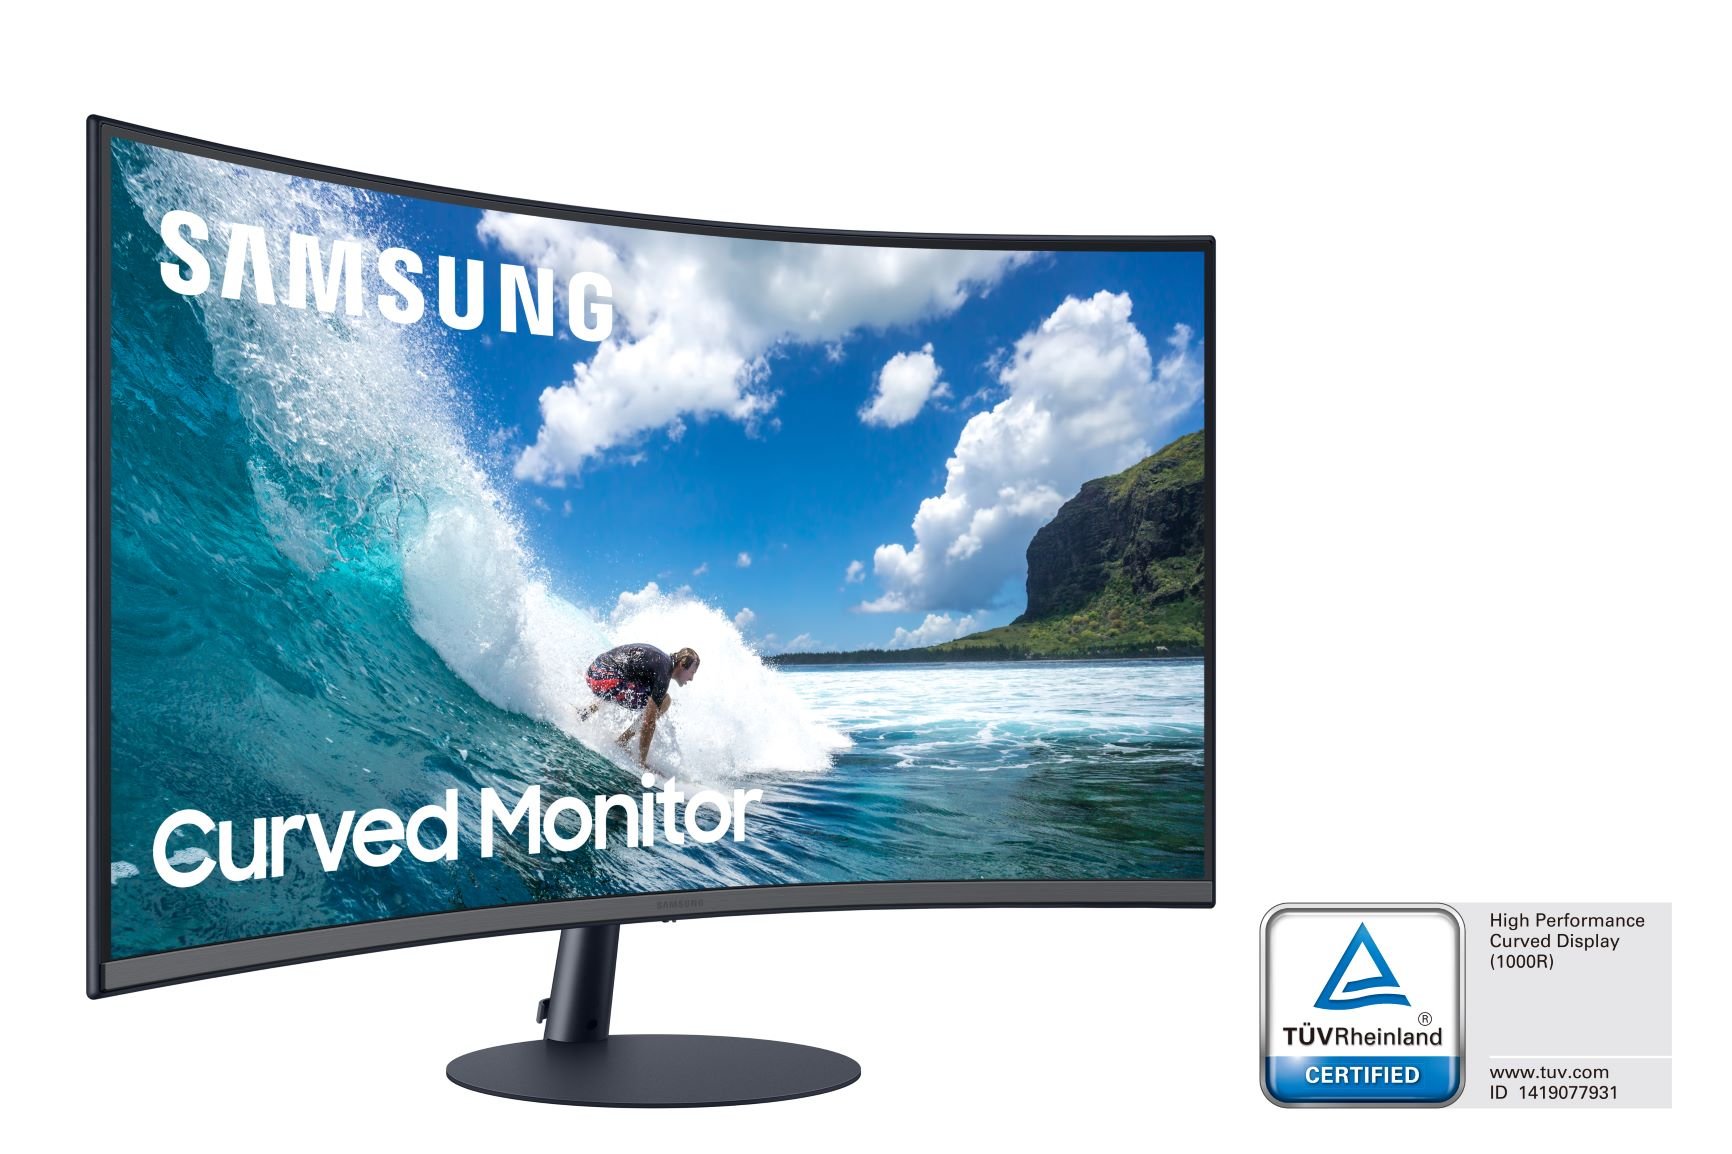 LC32T590FDUXEN 026 Award1 Black 1 Review: Samsung’s Curved CT55 Monitor Is Much Easier On The Eyes